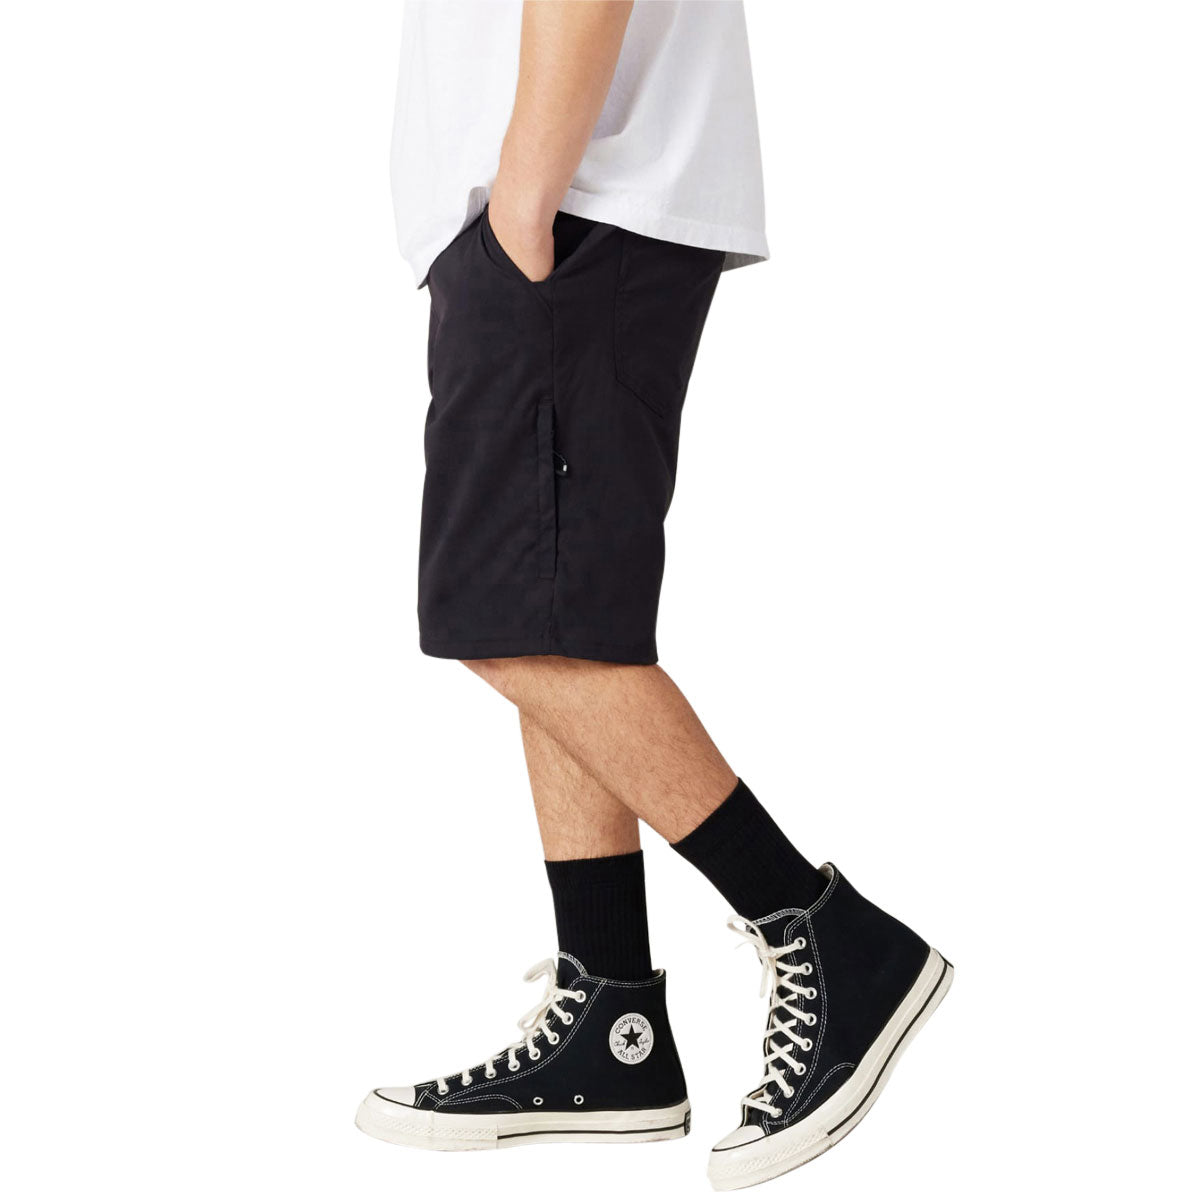 686 Everywhere Hybrid Relaxed Fit Shorts - Black image 3